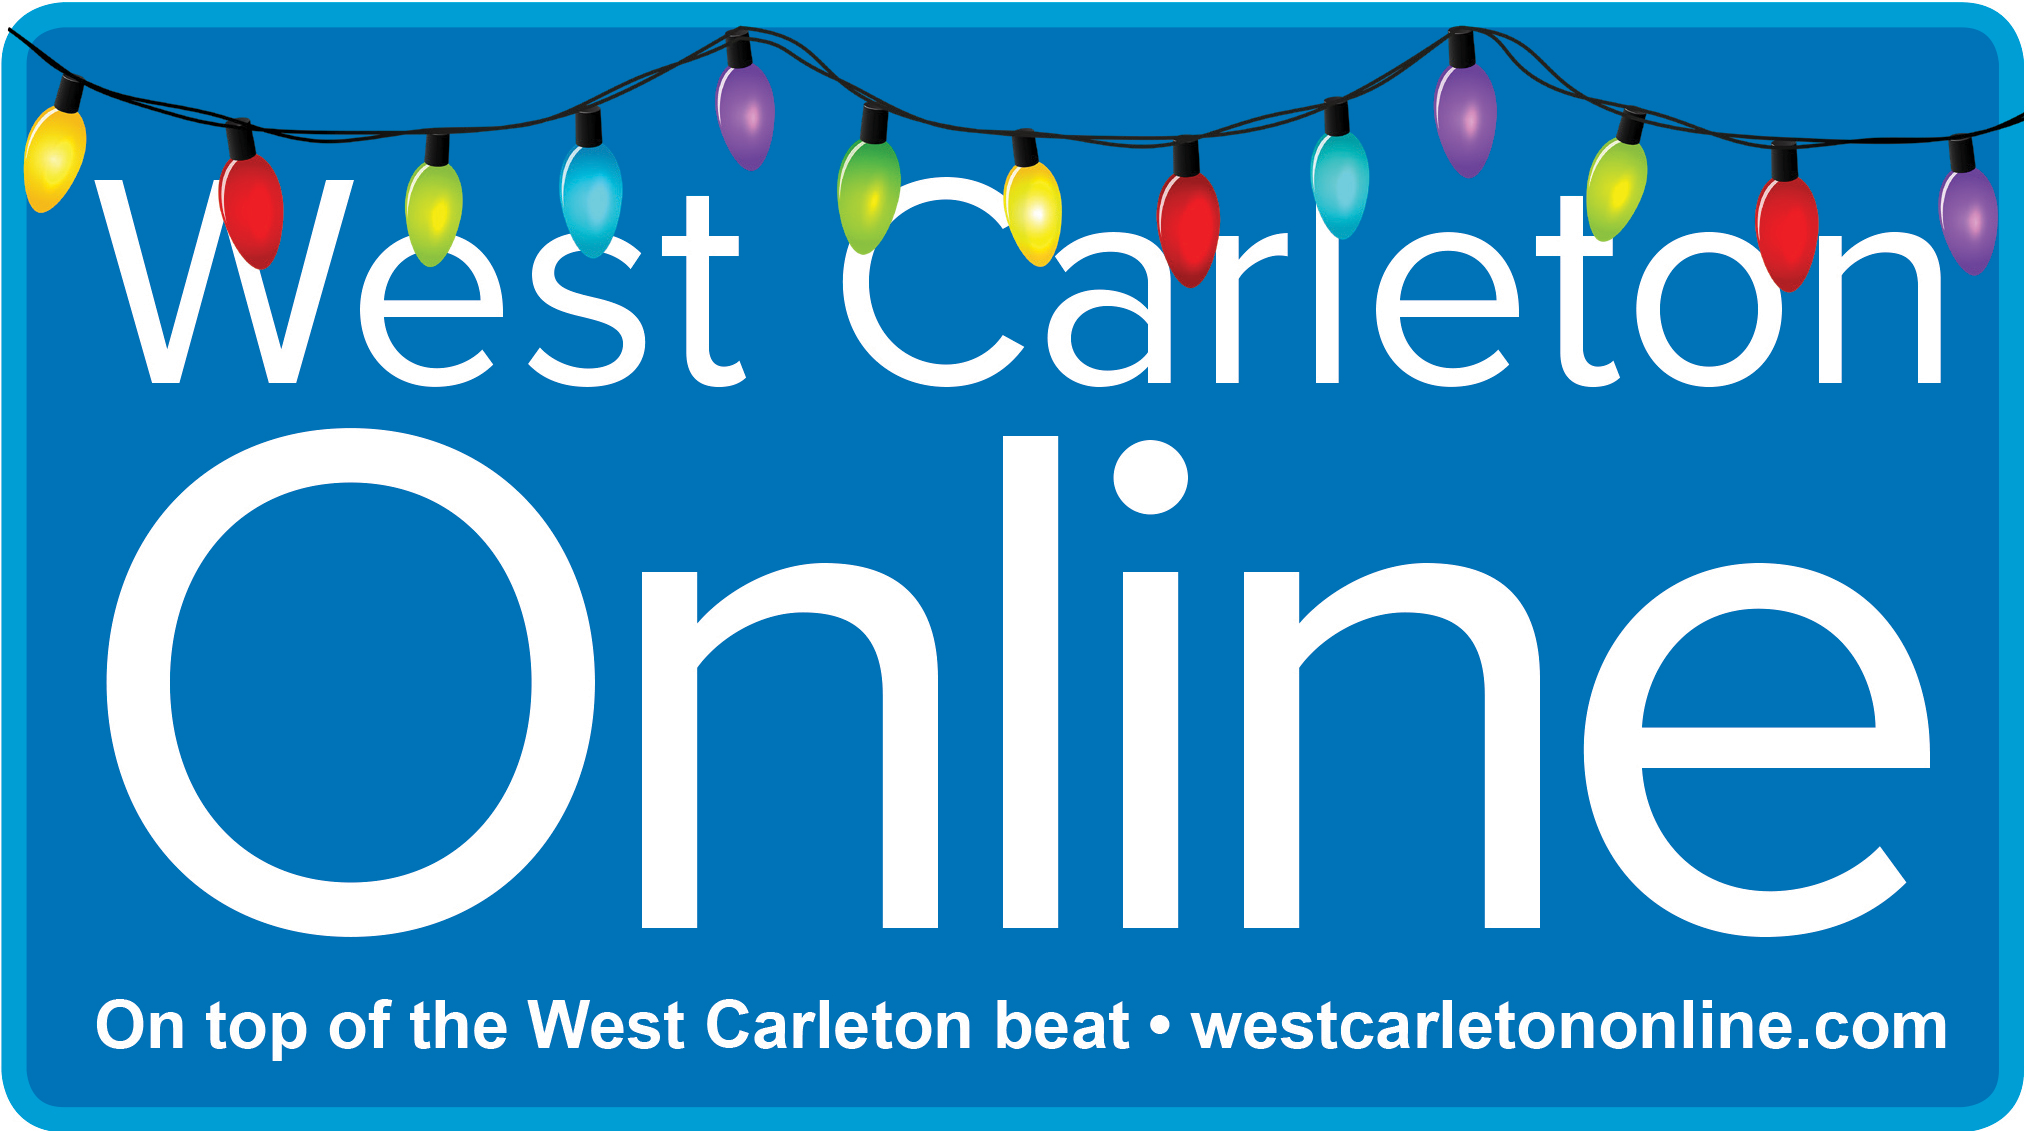 A Christmas themed logo for West Carleton Online.